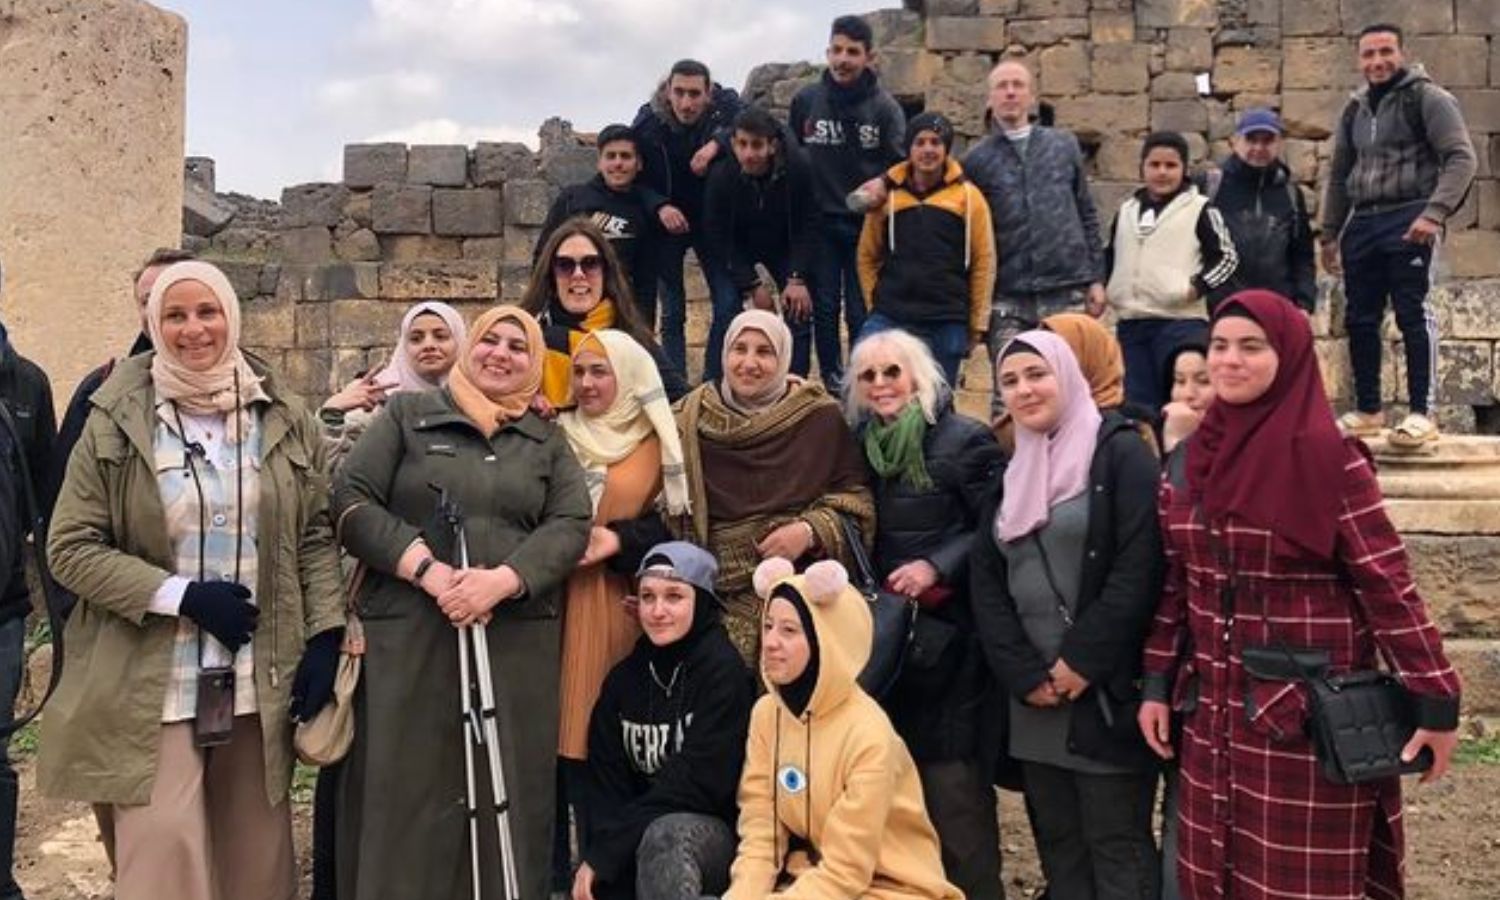 A tourist group in front of an archaeological site in Syria - 14 July 2022 (Young Pioneer Tours/Instagram)